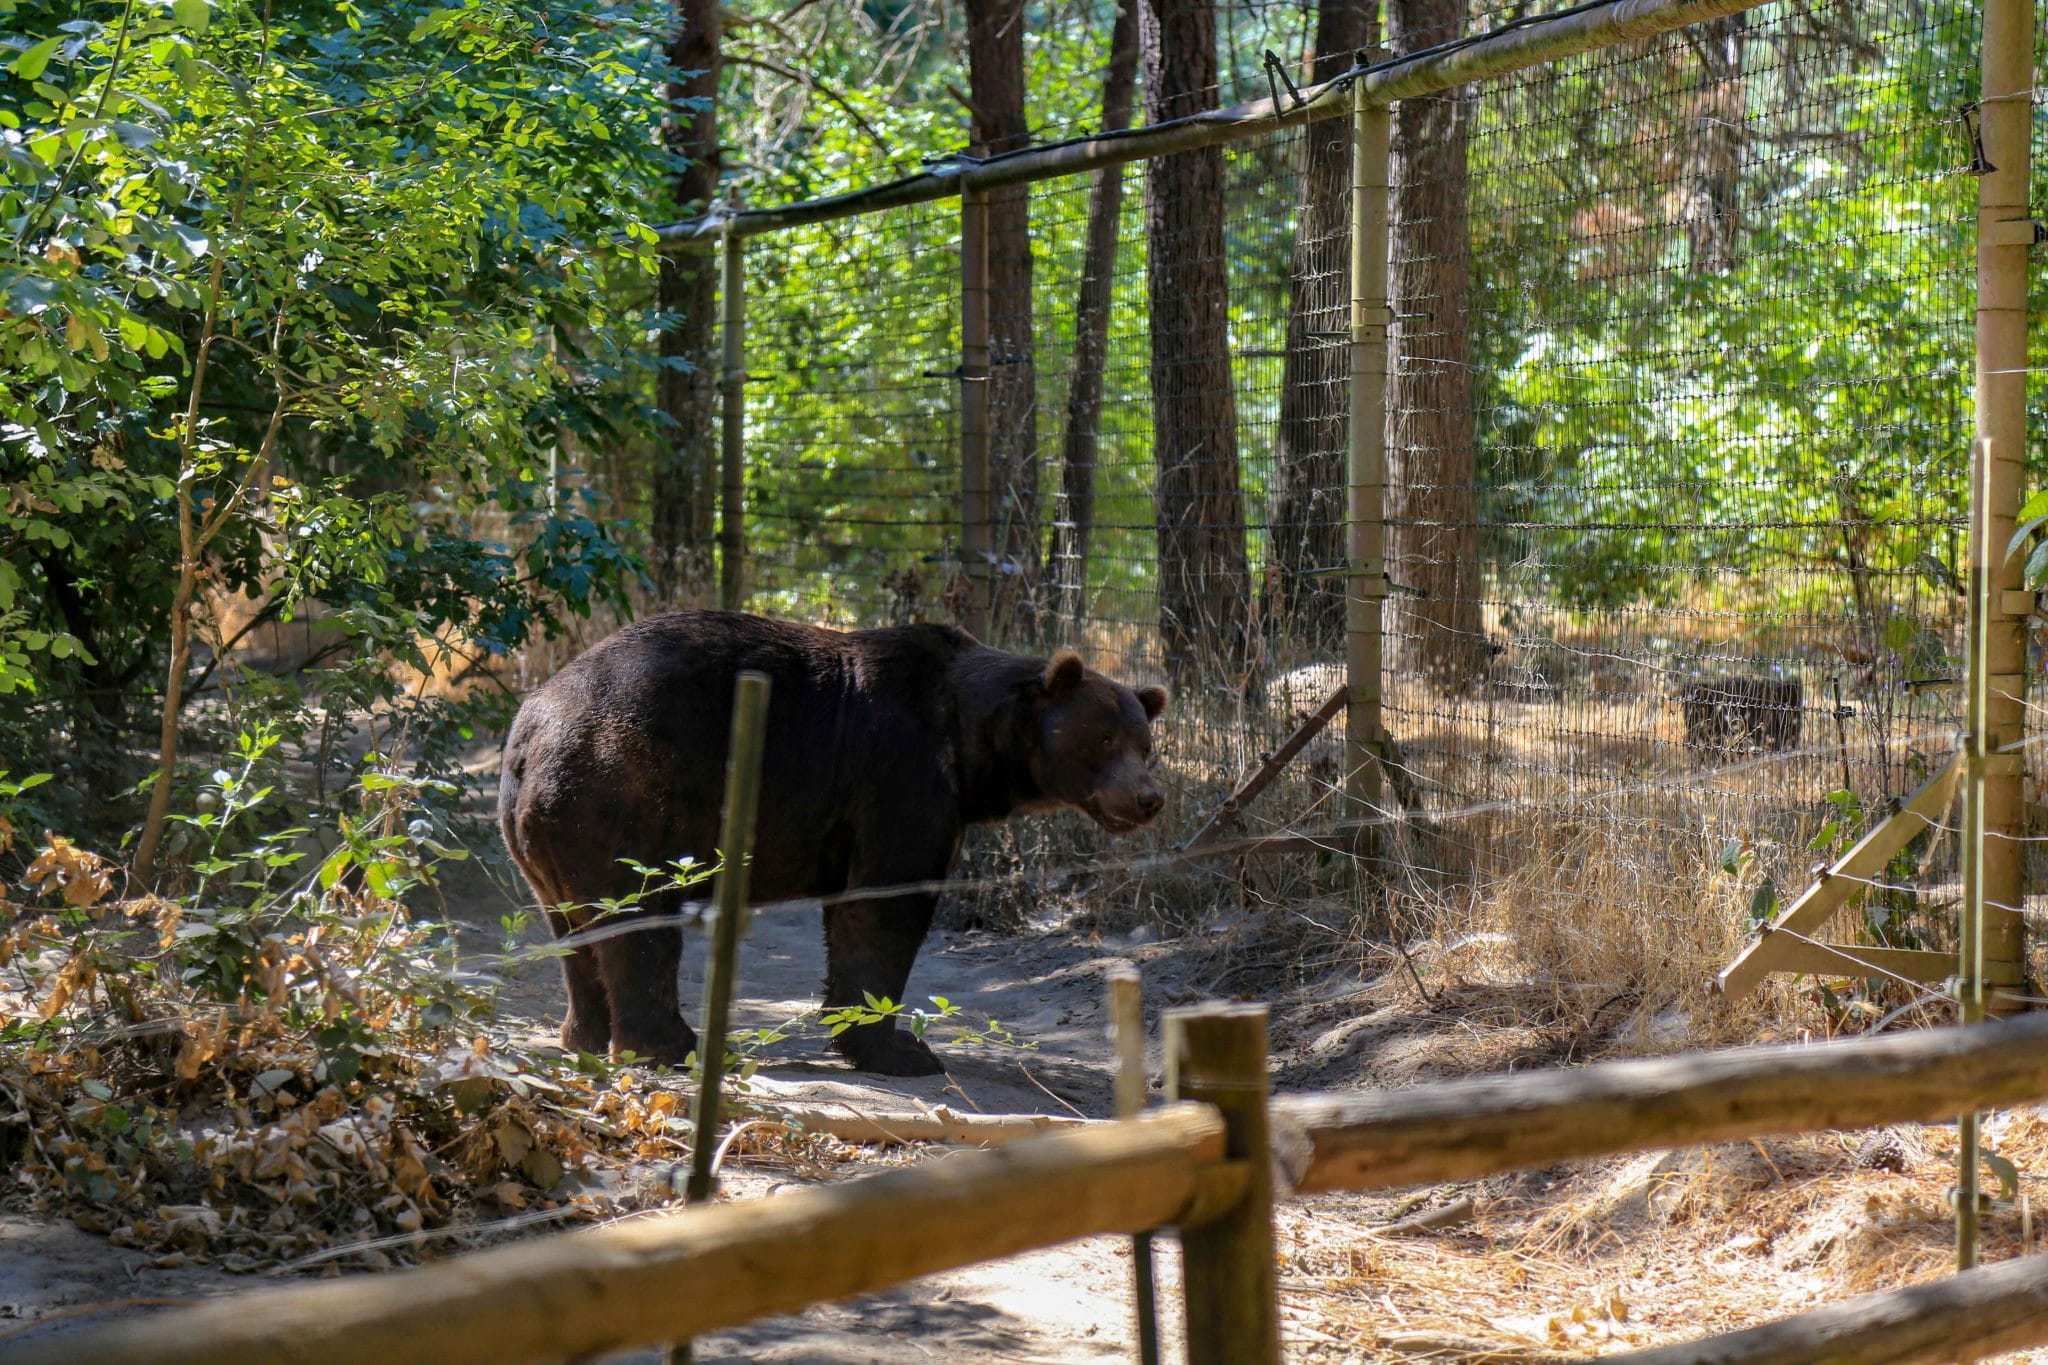 Grizzly bear standing in enclosure at Wildlife Images